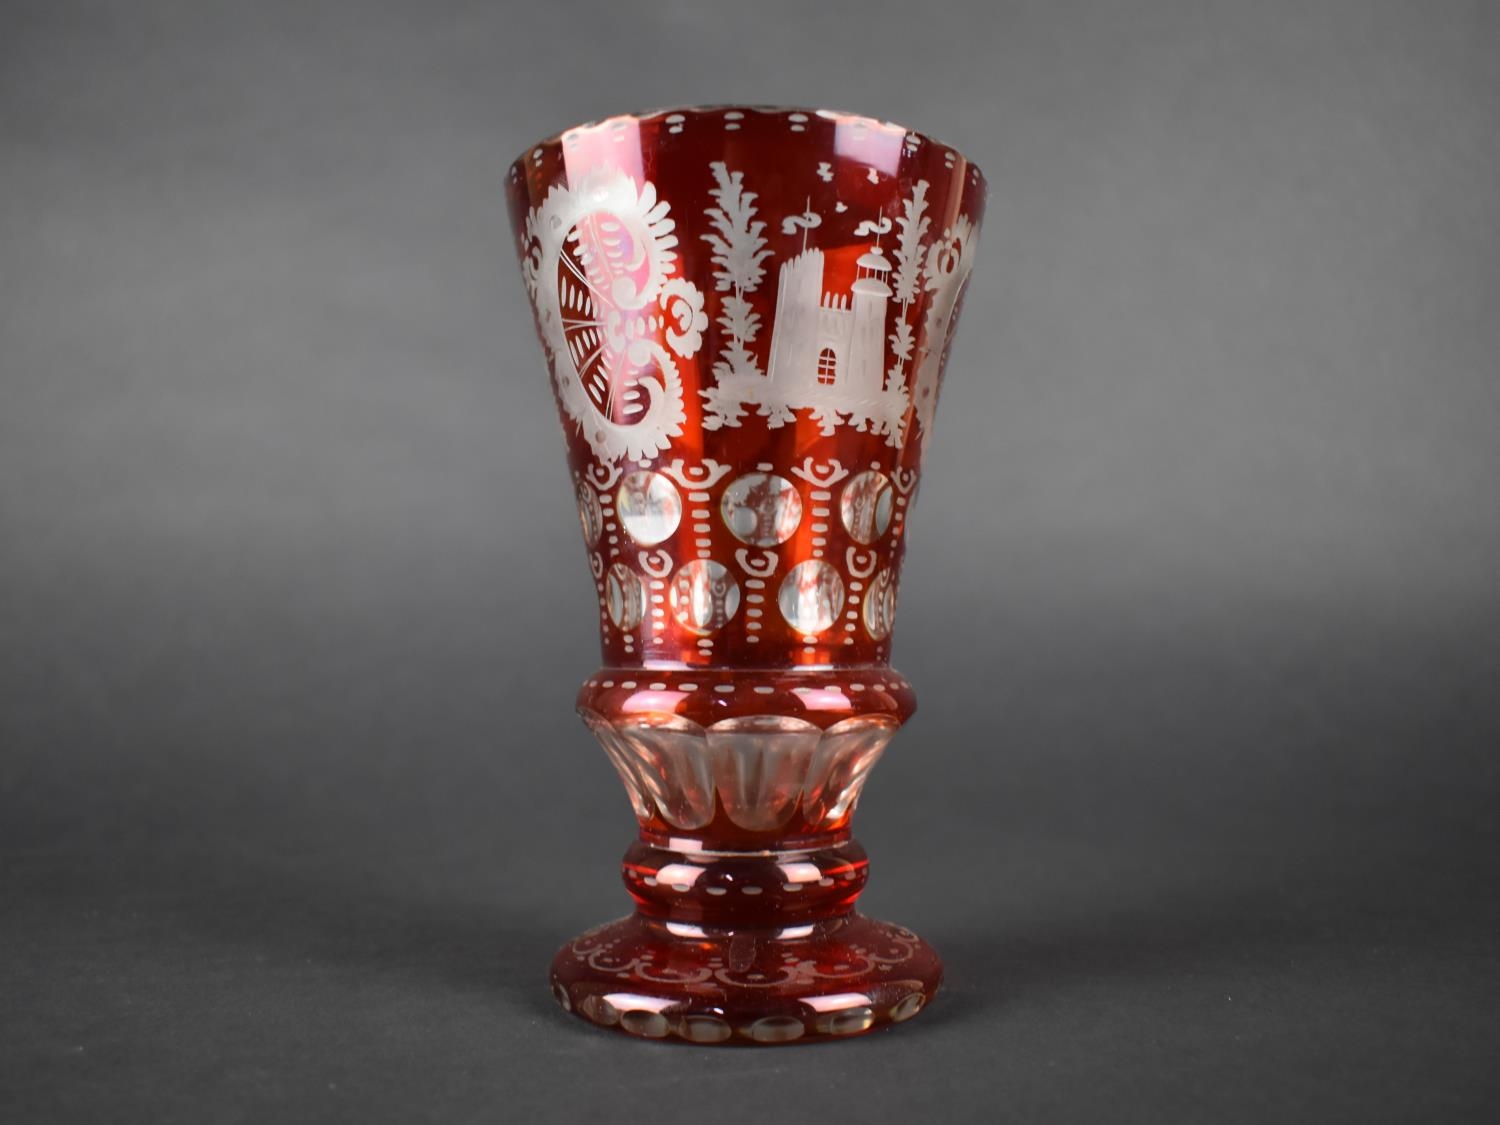 A Bohemian Etched Ruby Glass Vase Decorated with Foliage, Scrolls, Deer, Stalk, Castle, 16cm high - Image 4 of 5